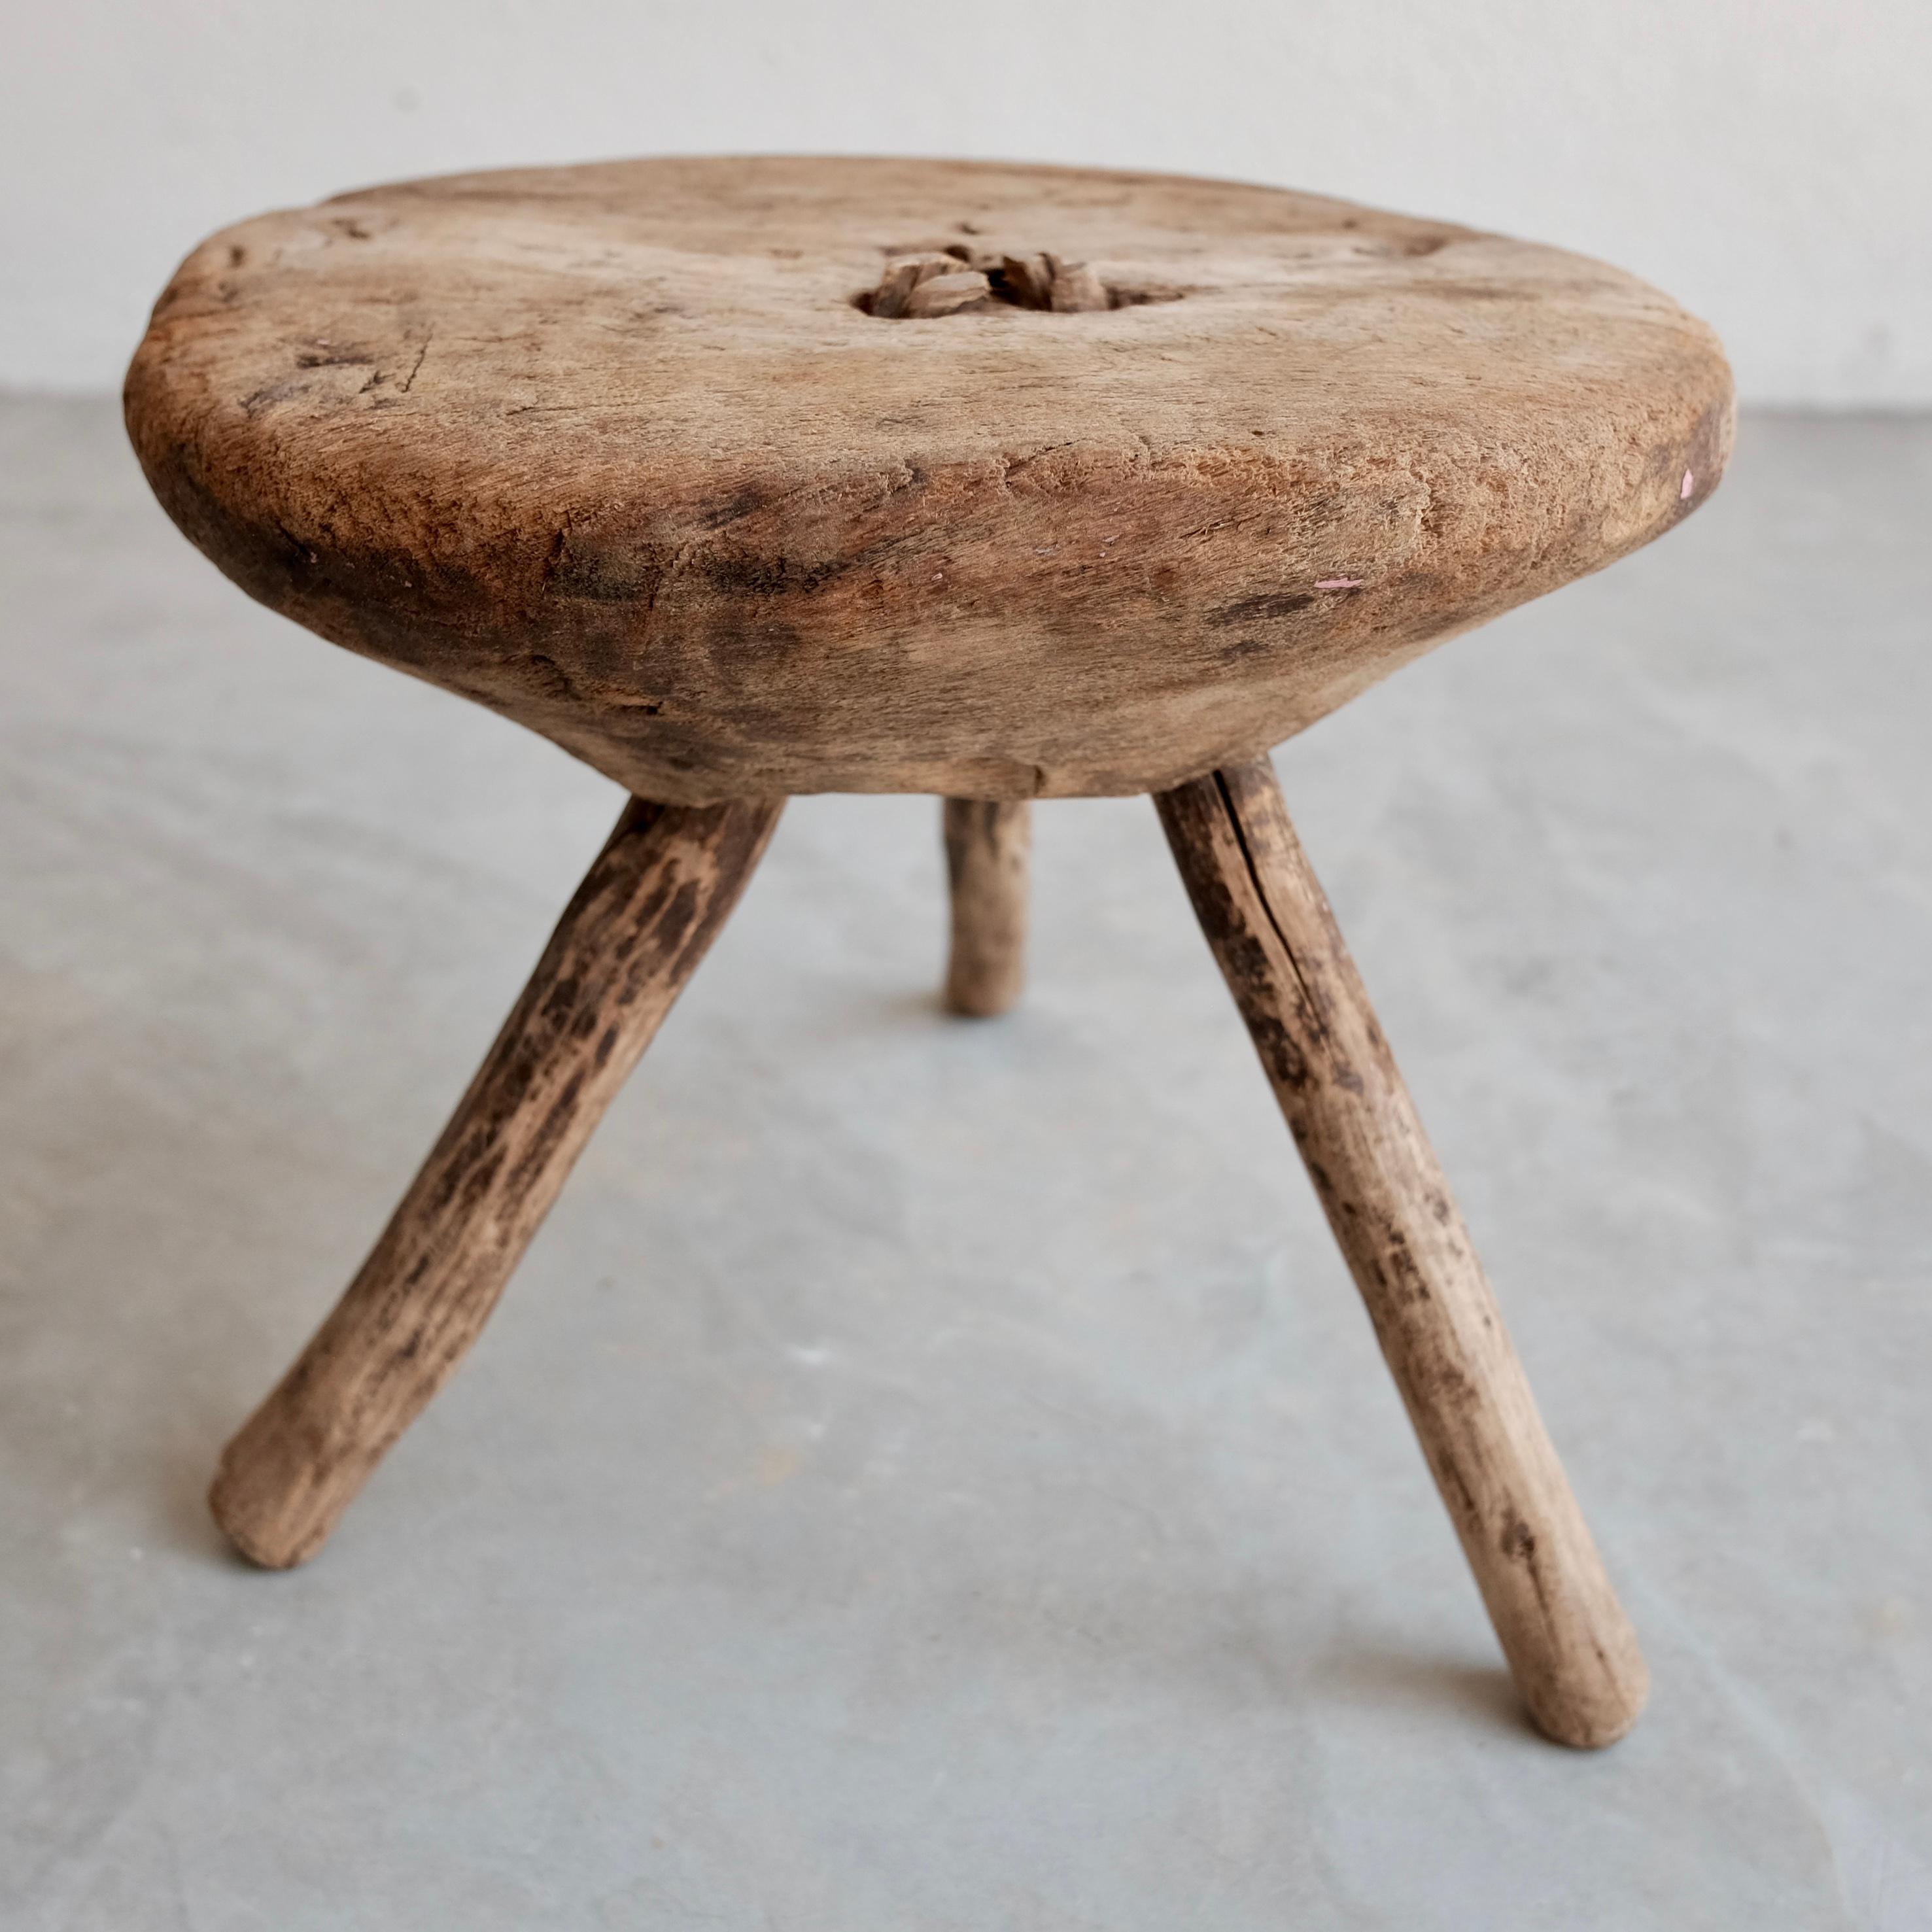 Mexican Milking Stool From Mexico